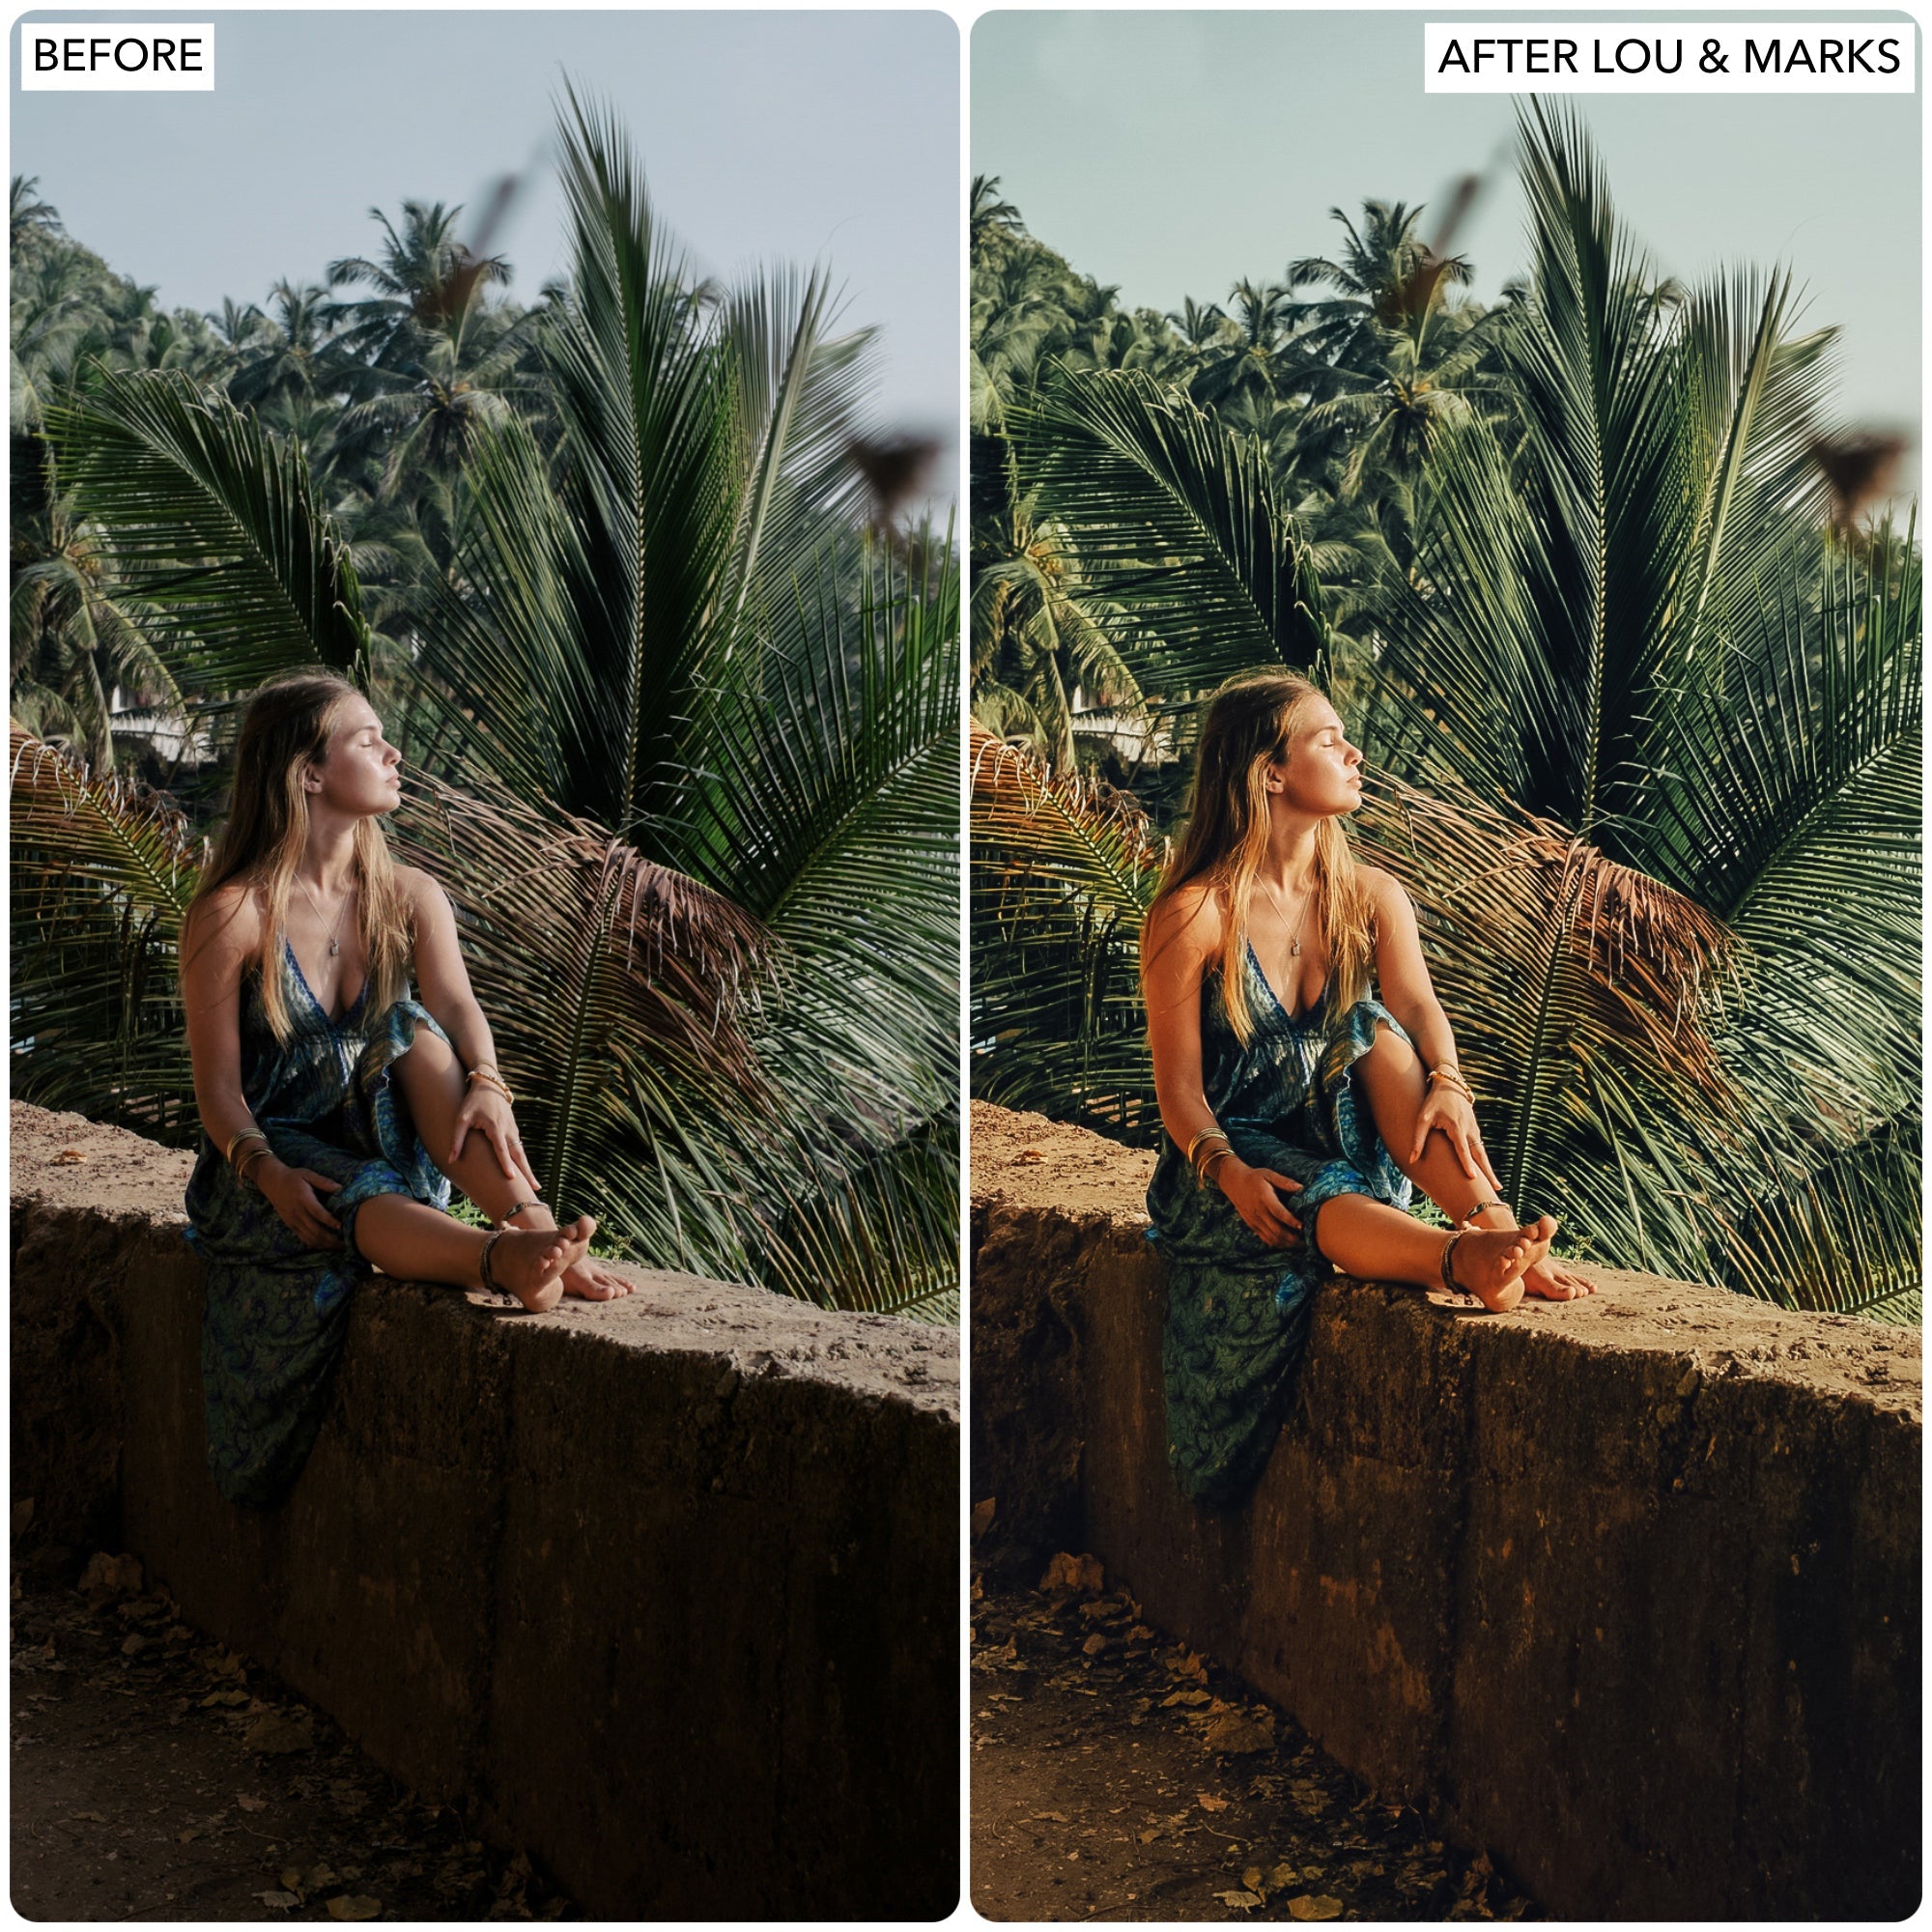 The Best Lightroom Presets Lifestyle Travel Film Portrait Family Instagram Influencer Blogger Mobile Desktop Lr LrC Natural Trendy Top Photo Filters Editing Food Photography Fall Summer Spring Winter Indoor Outdoor Photoshop Warm Moody Bright Airy Dark Luxe Aesthetic Wedding Top Selling Lou Marks